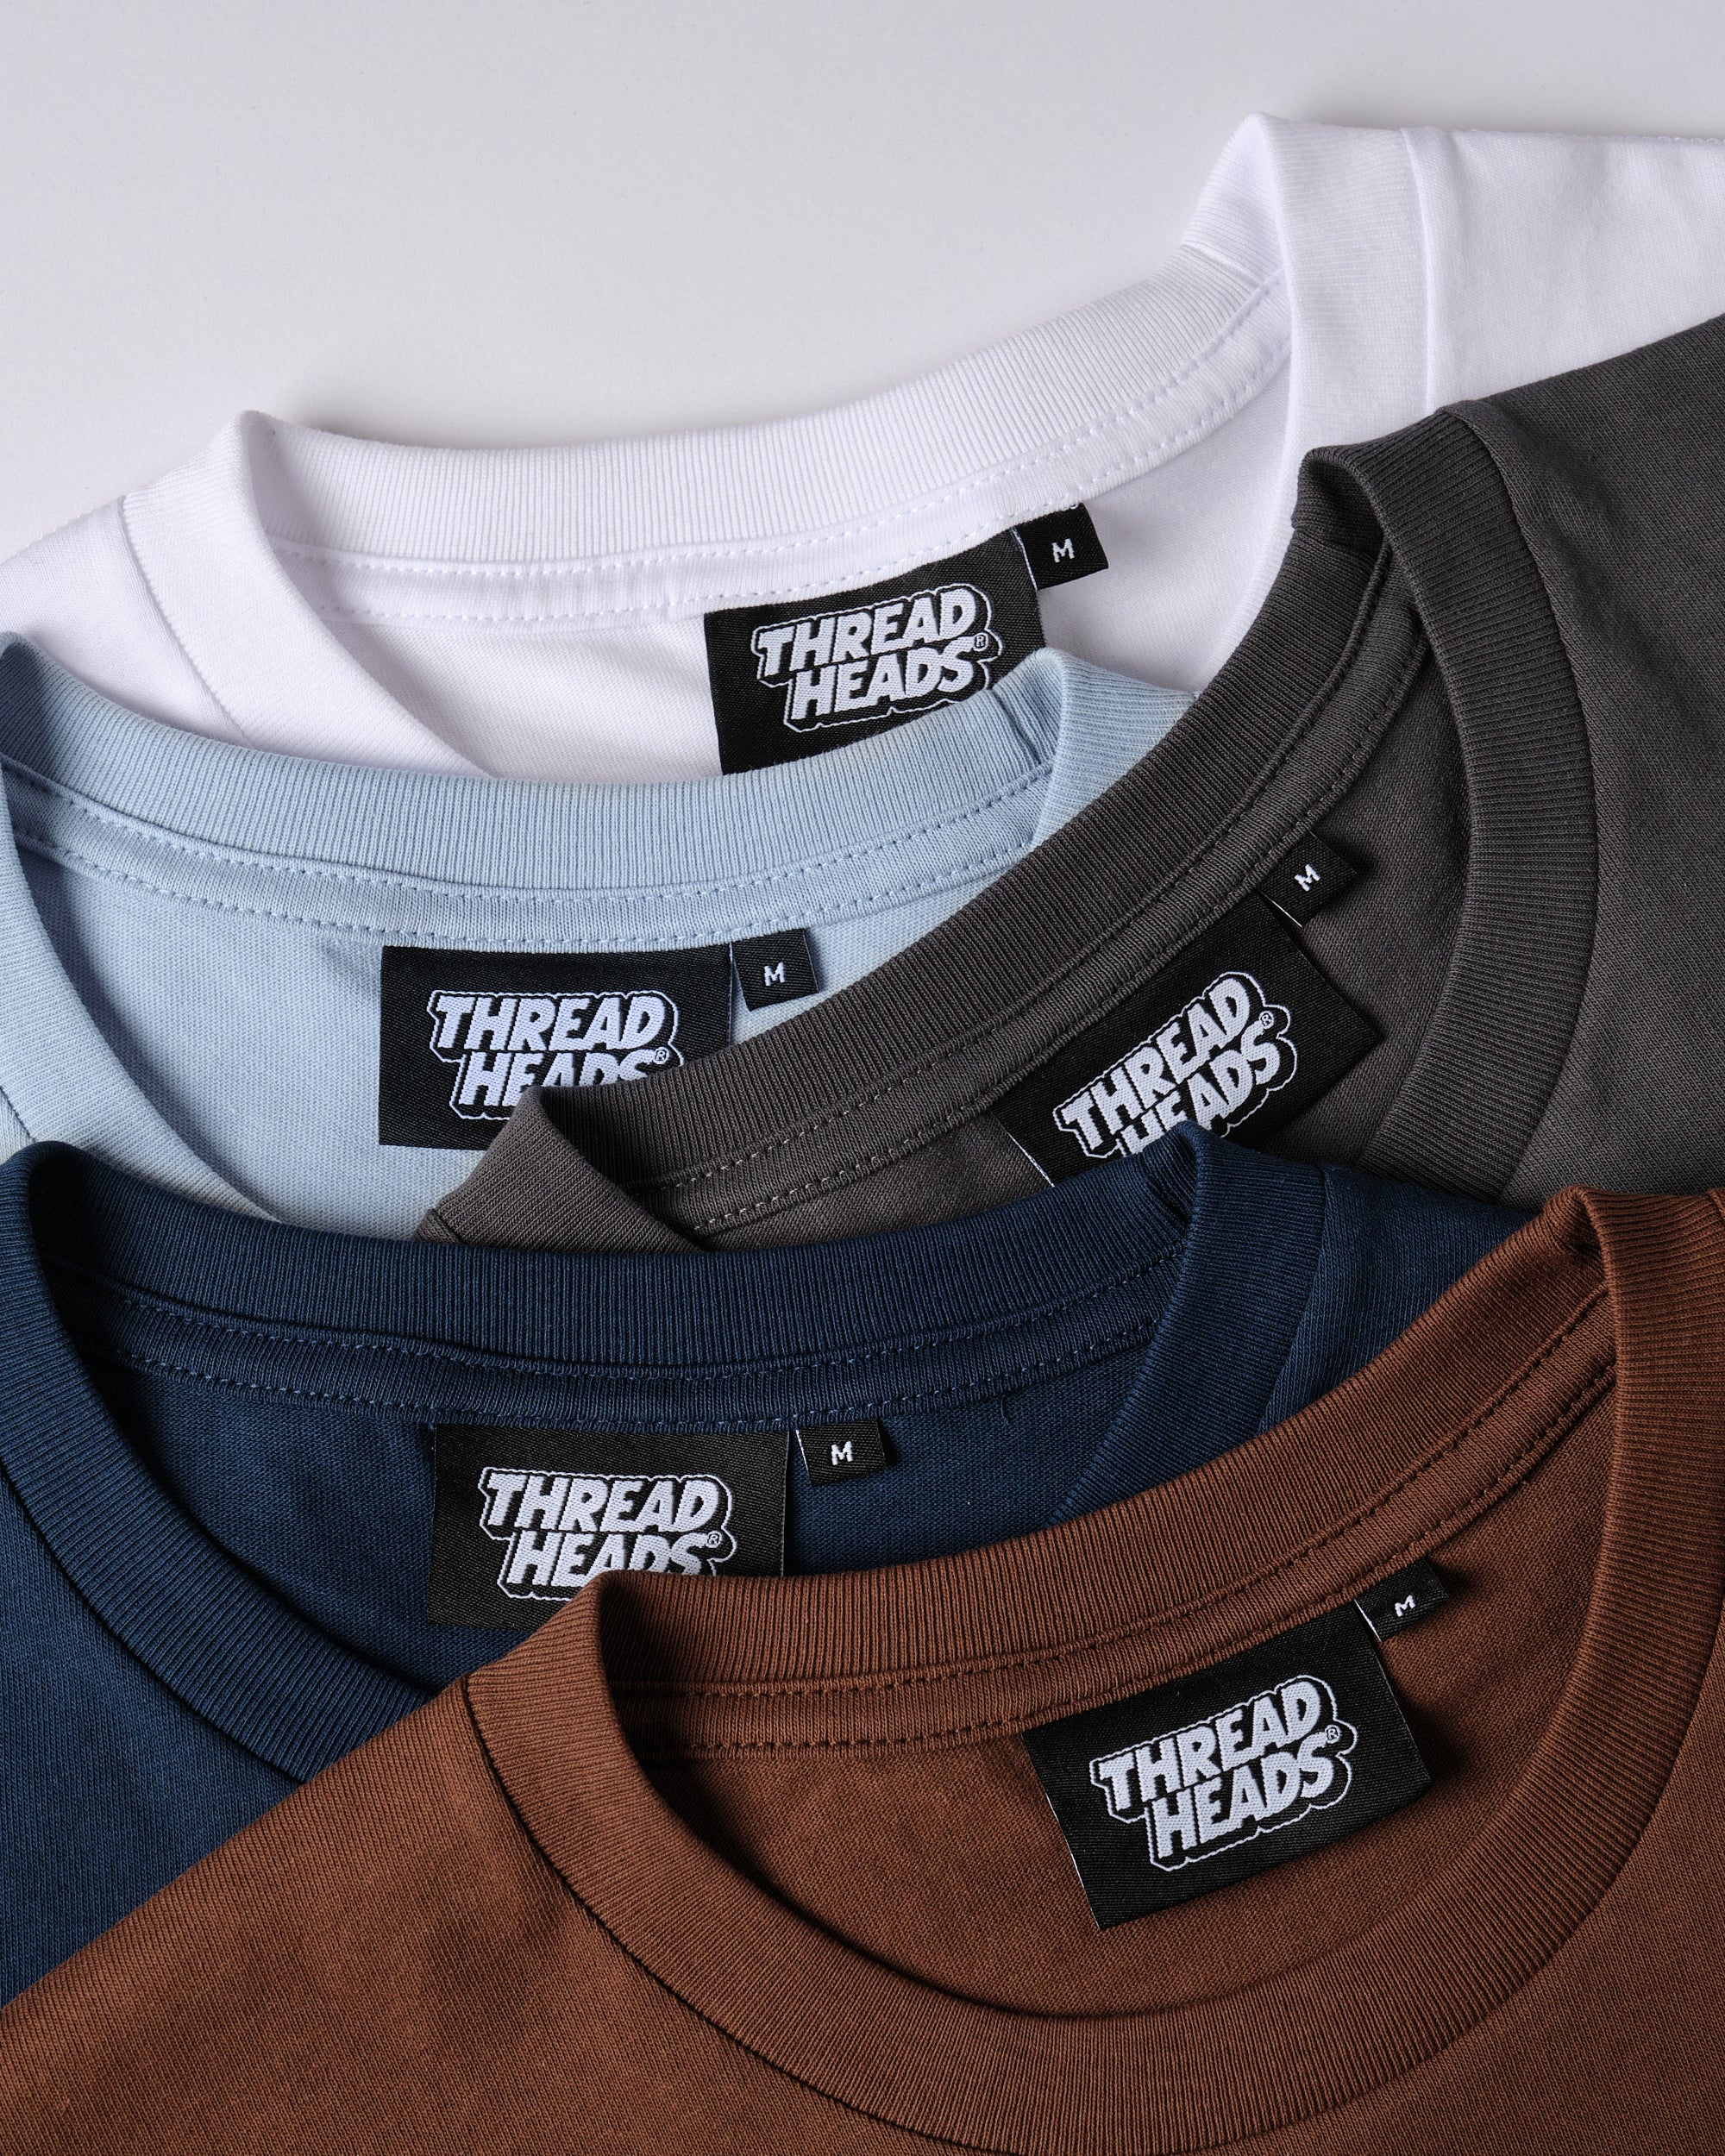 Classic Tee 5-Pack: Brown, Navy, Charcoal, Pale Blue, White